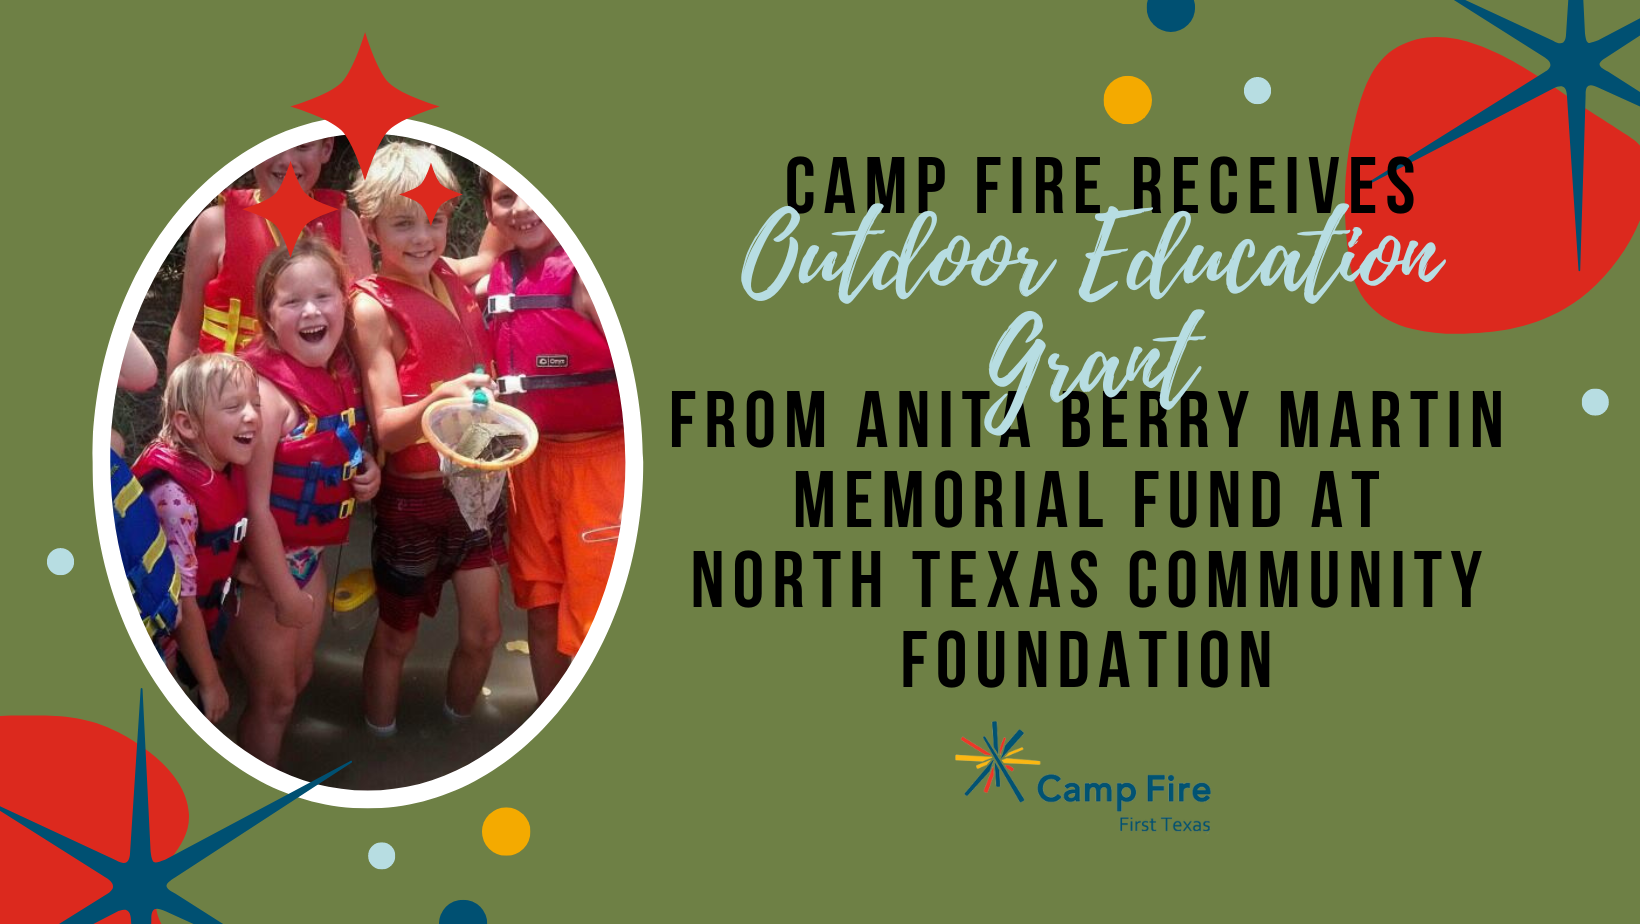 Camp Fire Receives Outdoor Education Grant from Anita Berry Martin Memorial Fund at North Texas Community Foundation, a Camp Fire First Texas blog